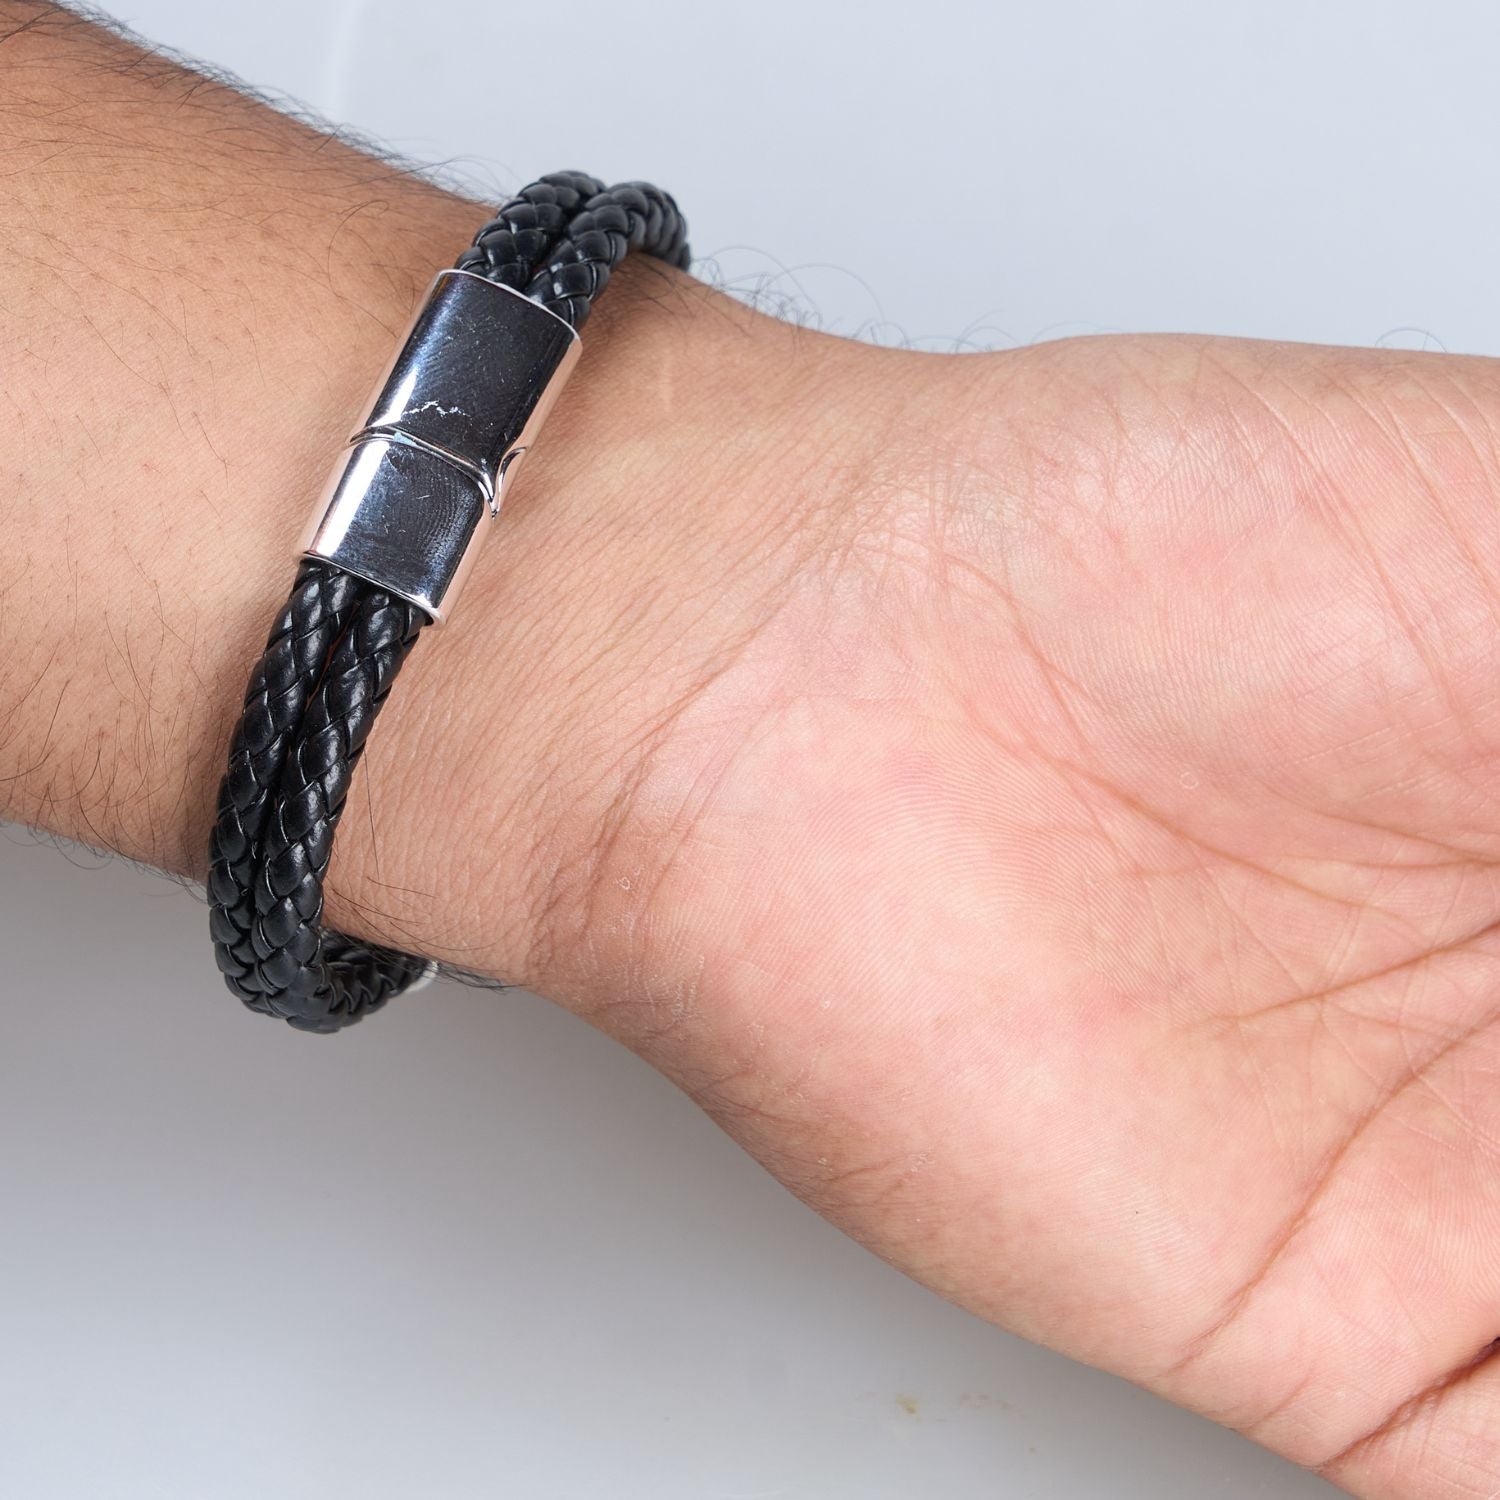 Back View of Black and Silver colored Bracelet for men with magnetic clasp